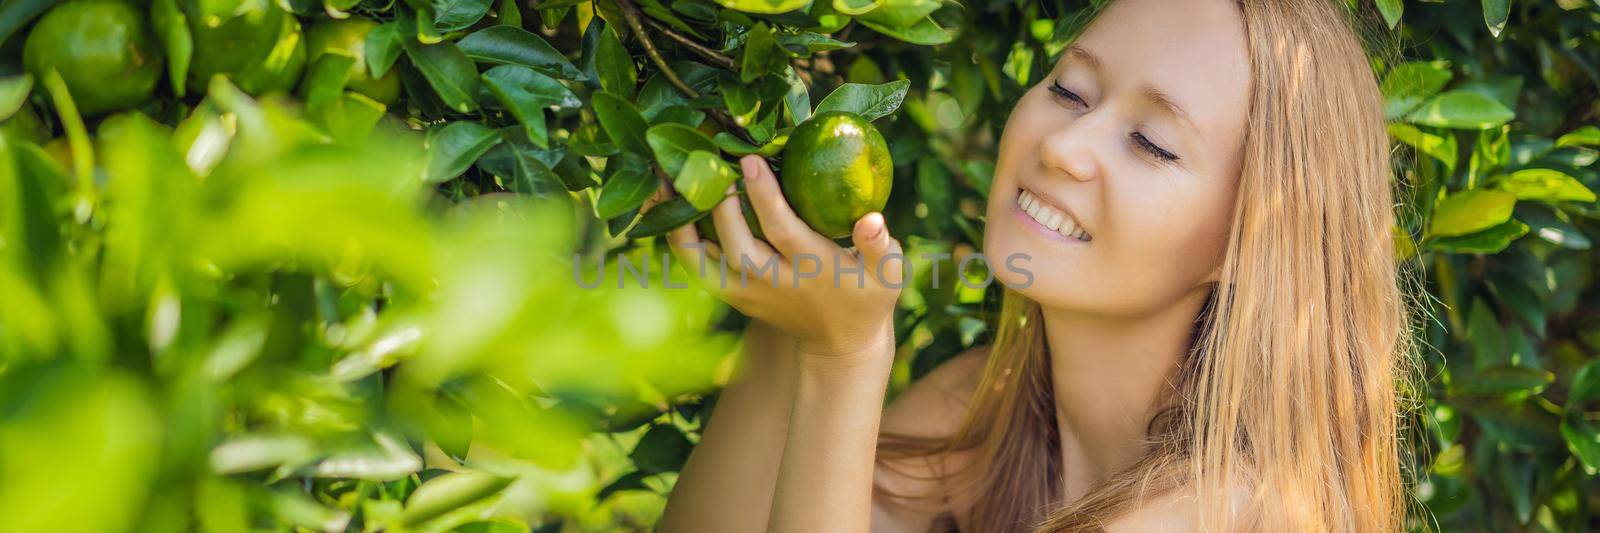 BANNER, LONG FORMAT Portrait of Attractive Farmer Woman is Harvesting Orange in Organic Farm, Cheerful Girl in Happiness Emotion While Reaping Oranges in The Garden, Agriculture and Plantation Concept by galitskaya